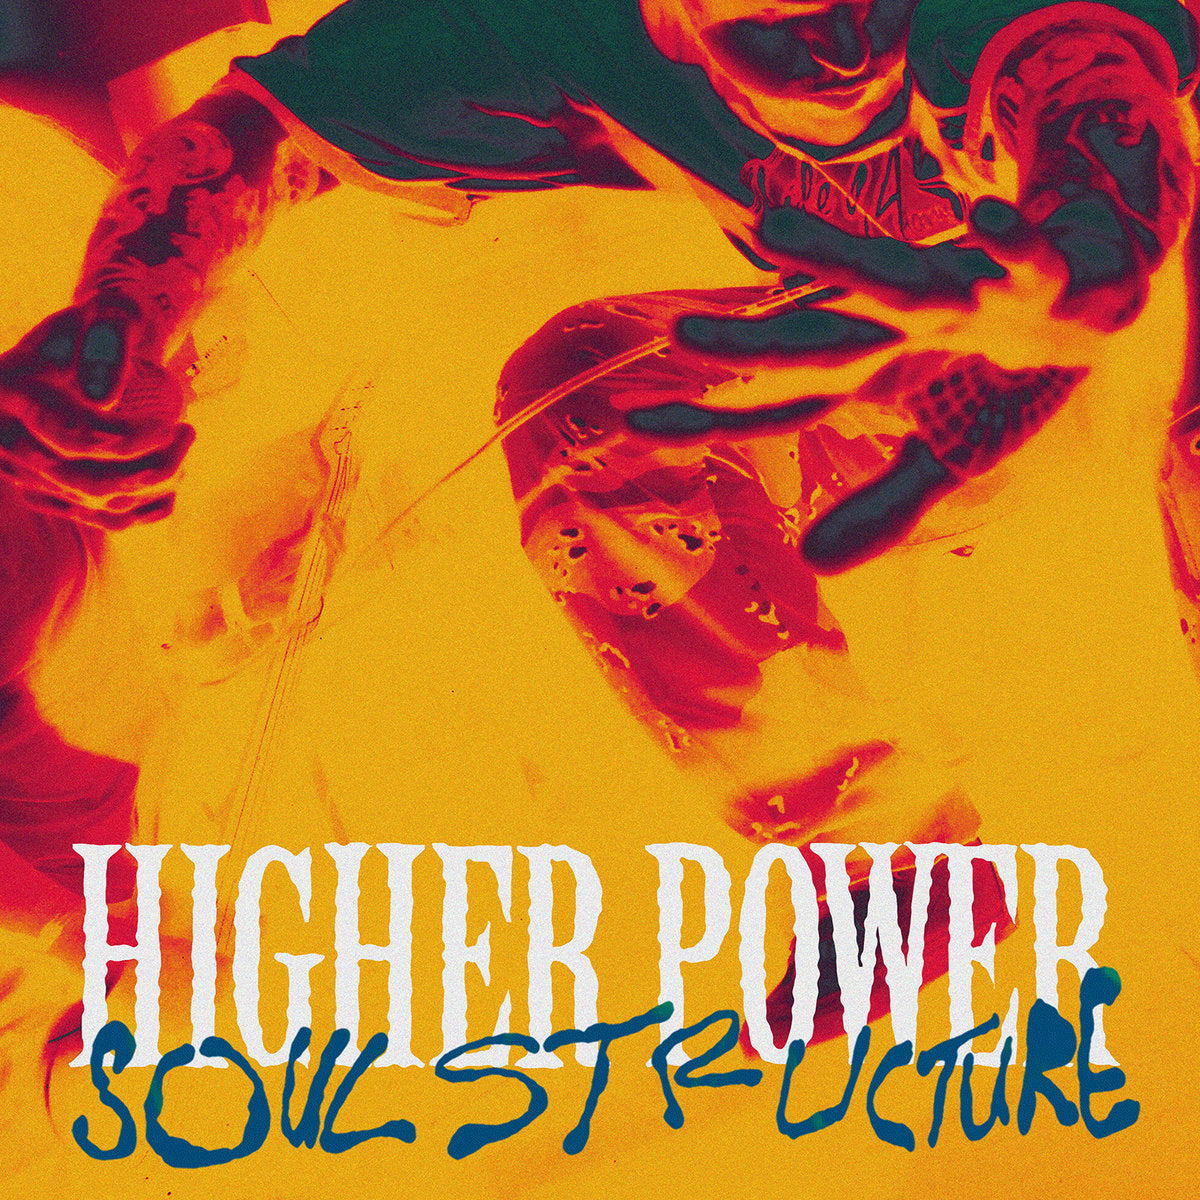 HIGHER POWER "Soul Structure" CD